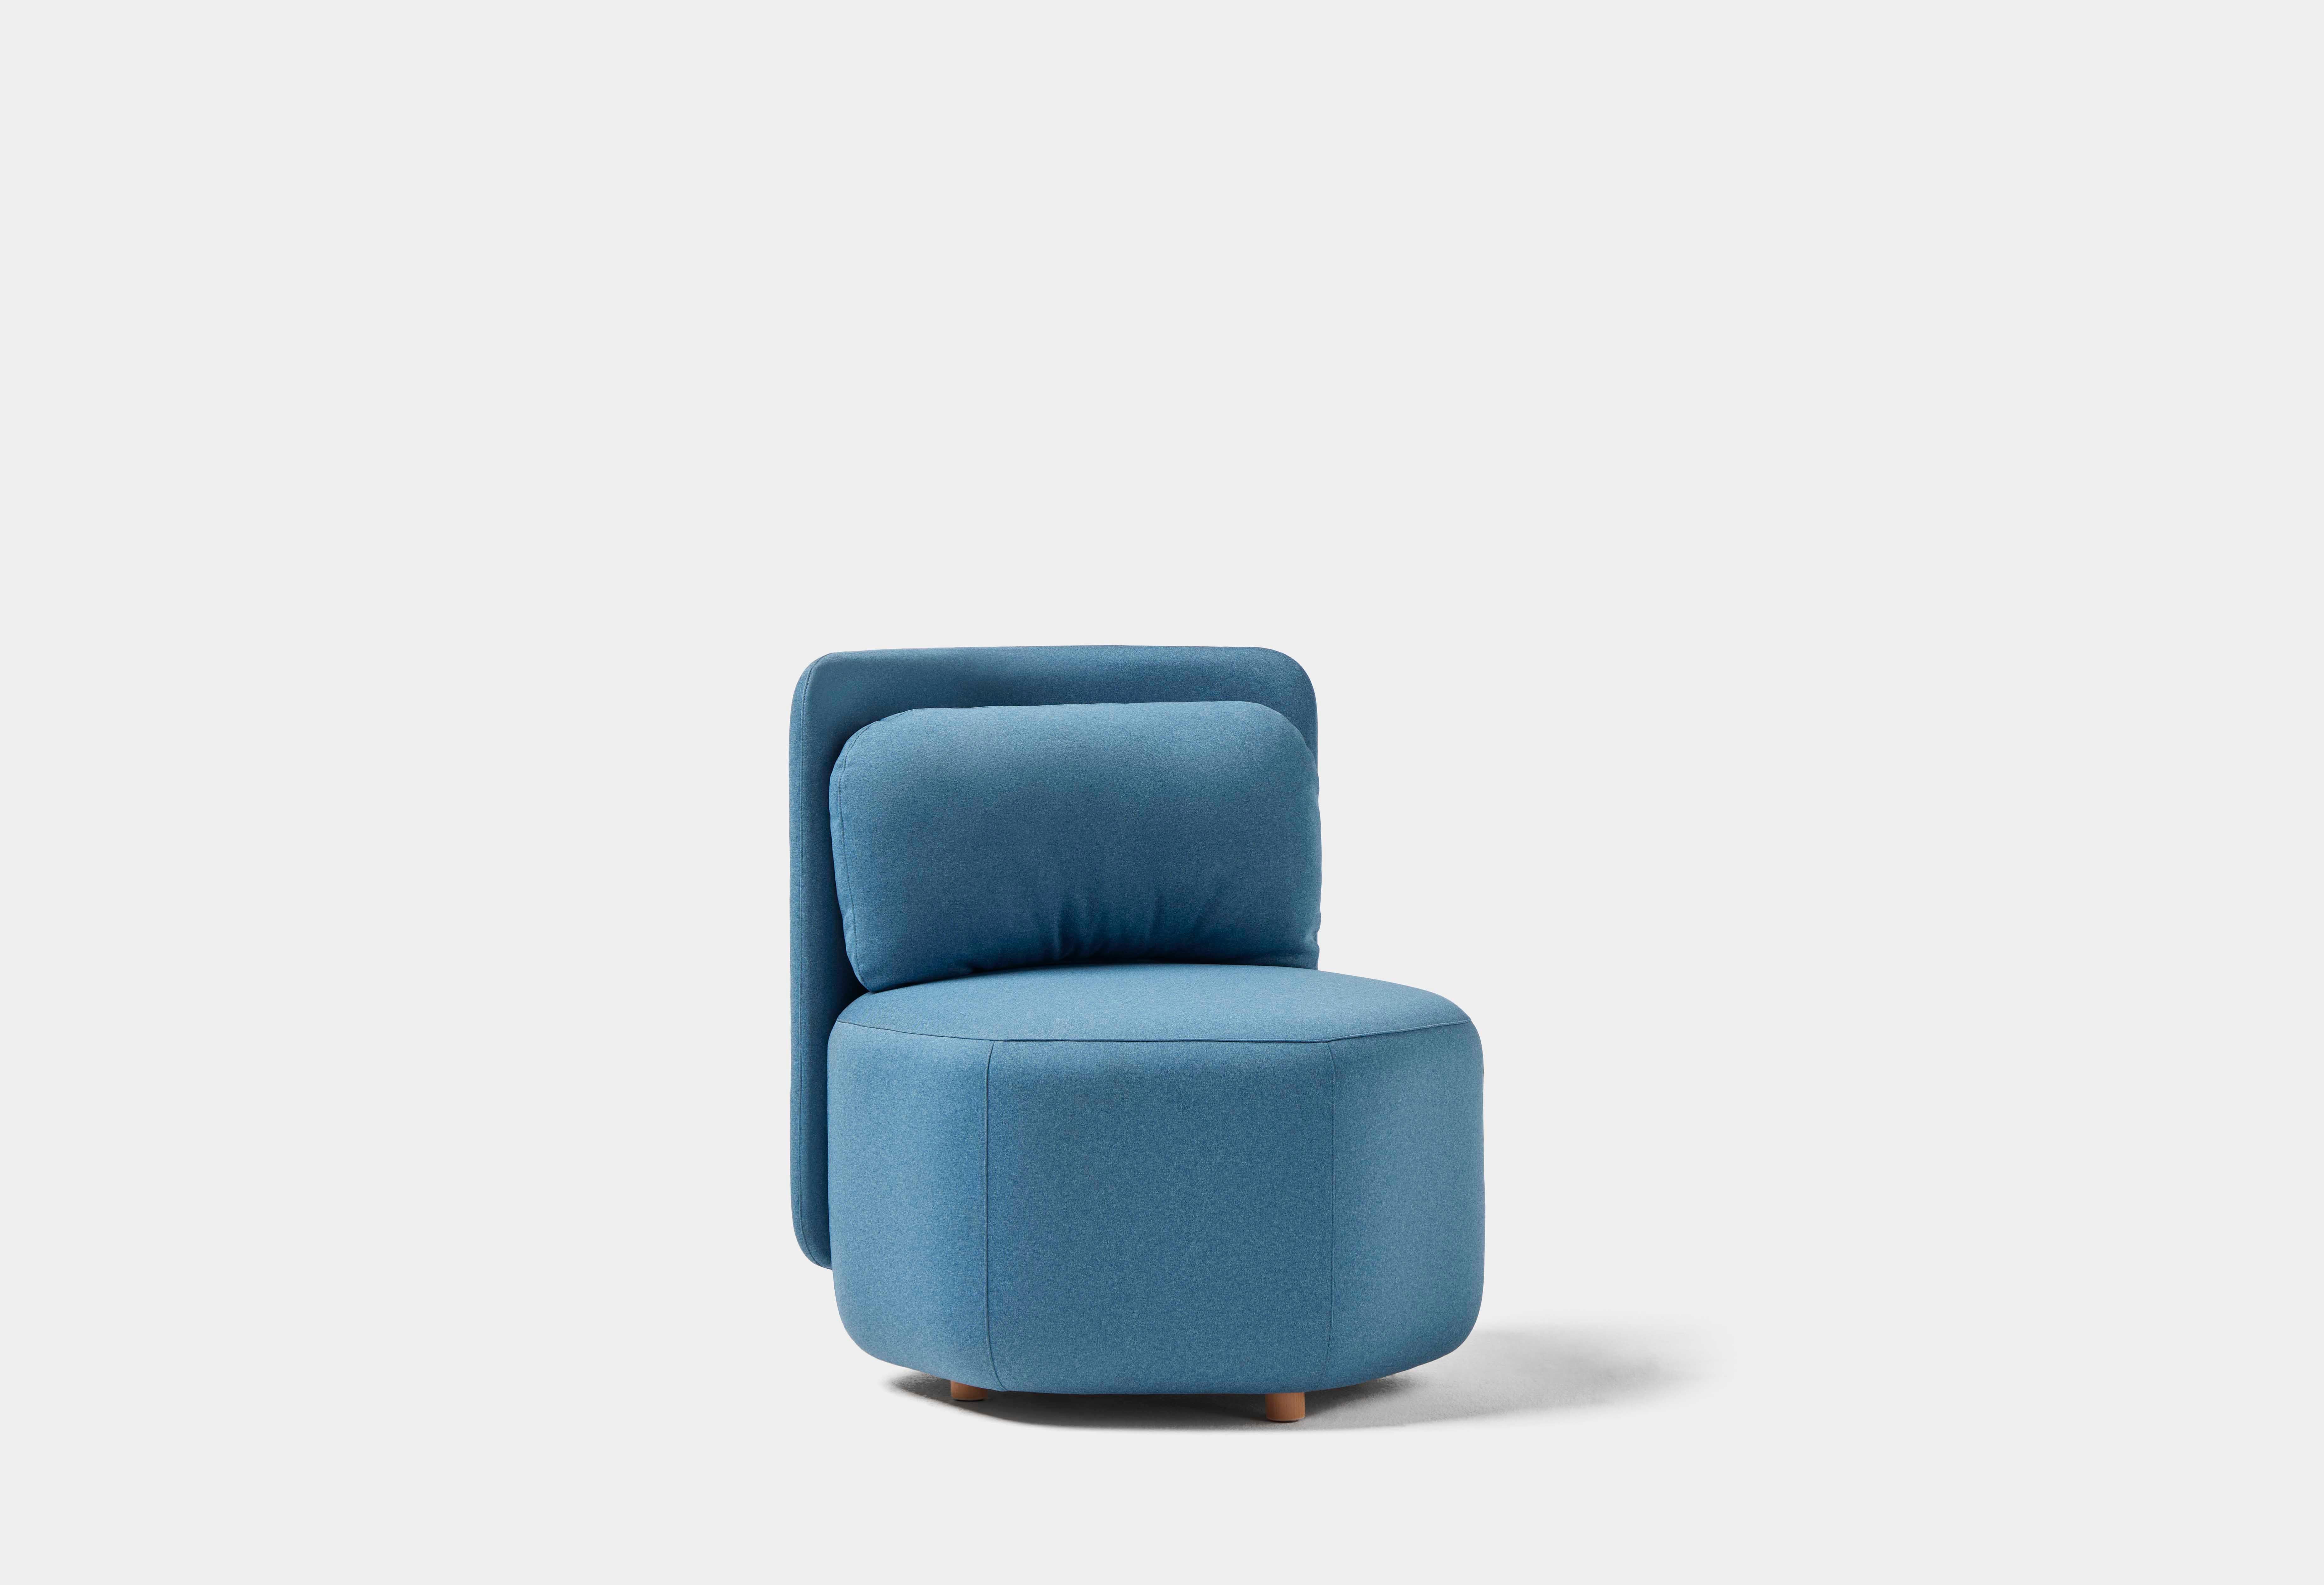 HEX armchair with low backrest by Pepe Albargues
Dimensions: W 70 x D 77 x H 80 x Seat 44
Materials: Pine wood and tablex seat structure. Backrest with metal frame, plywood and tablex board. Foam CMHR (high resilience and flame retardant) for all